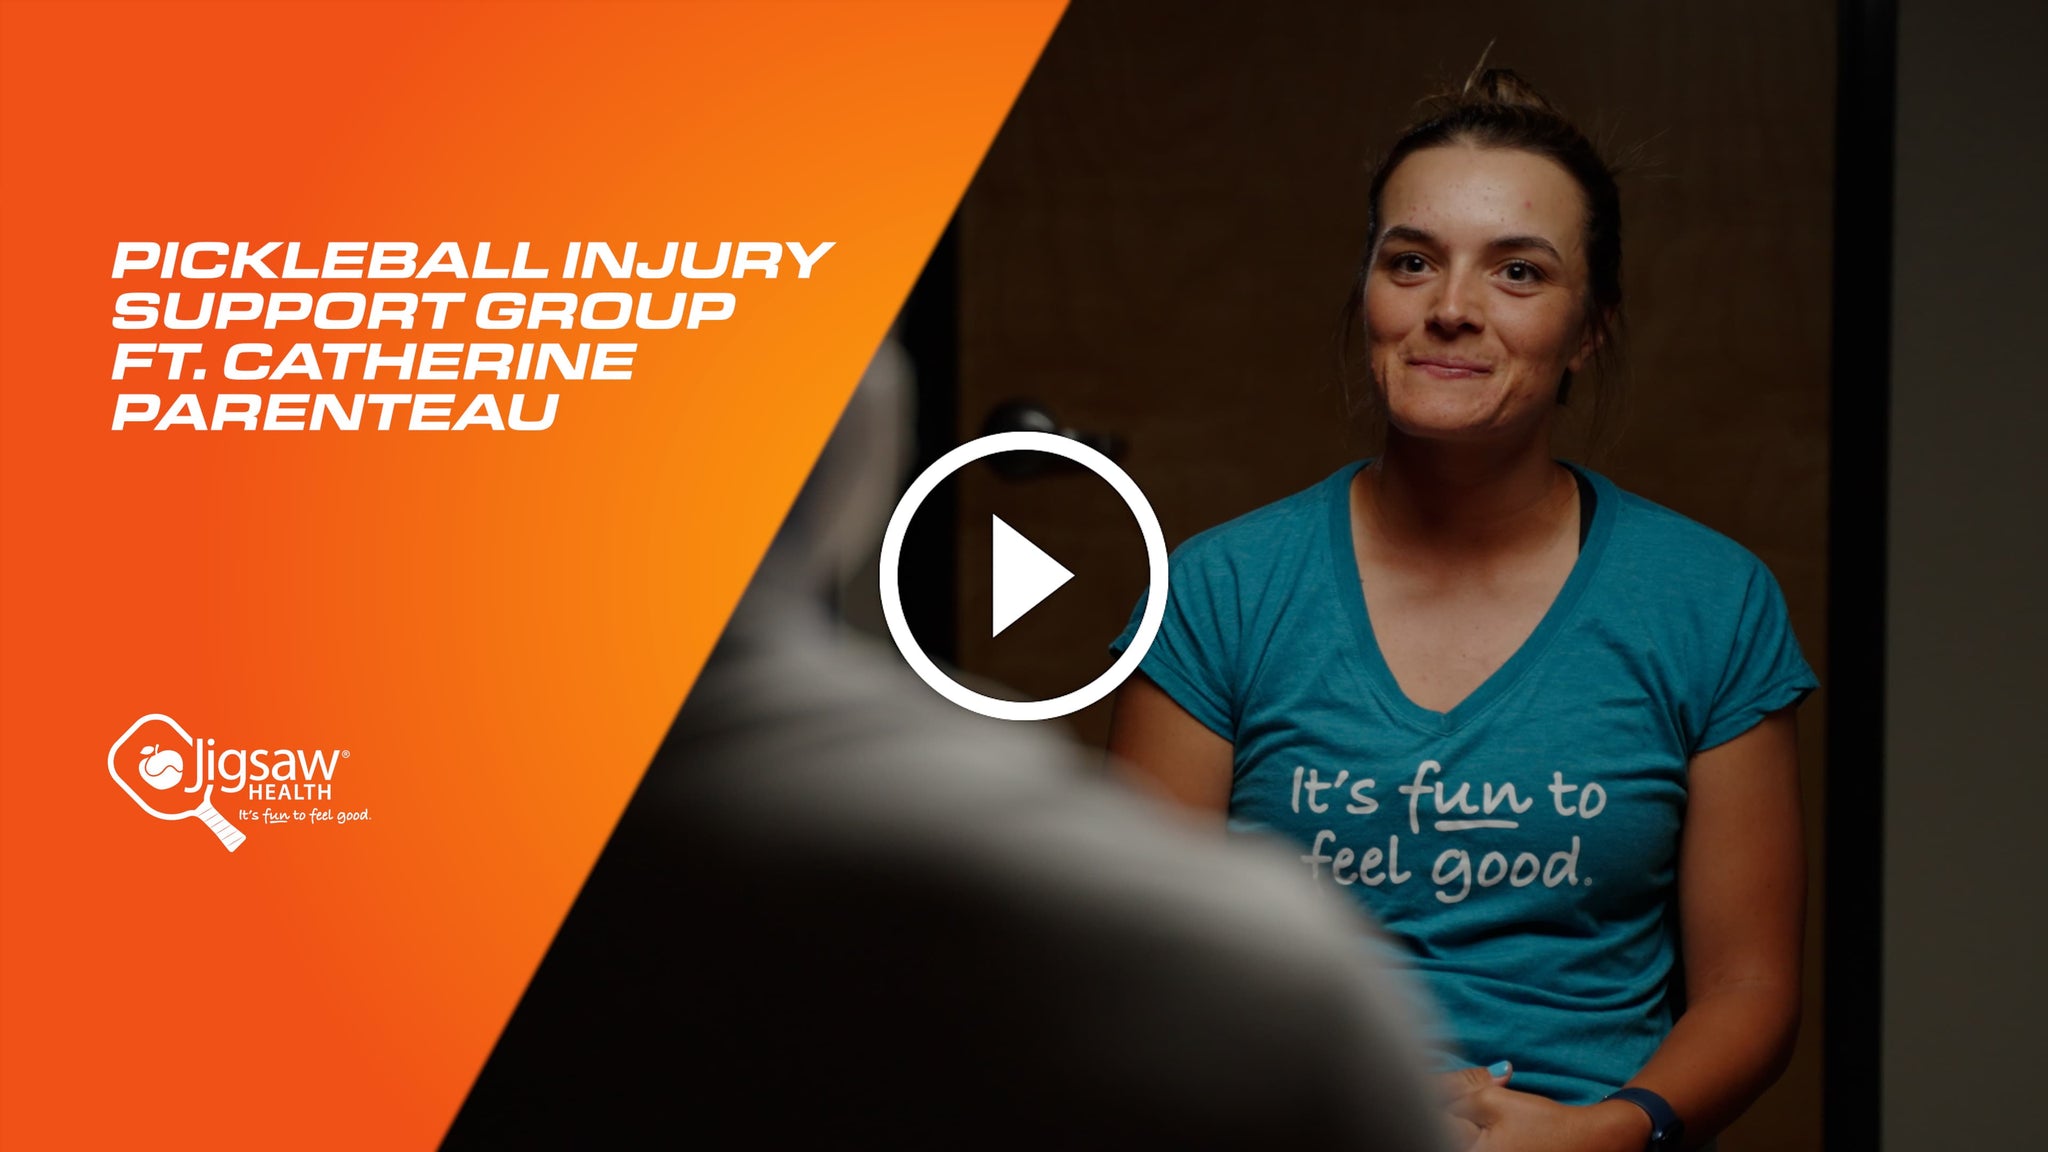 Pickleball Injury Support Group (feat. Catherine Parenteau) | We Love Pickleball, Too